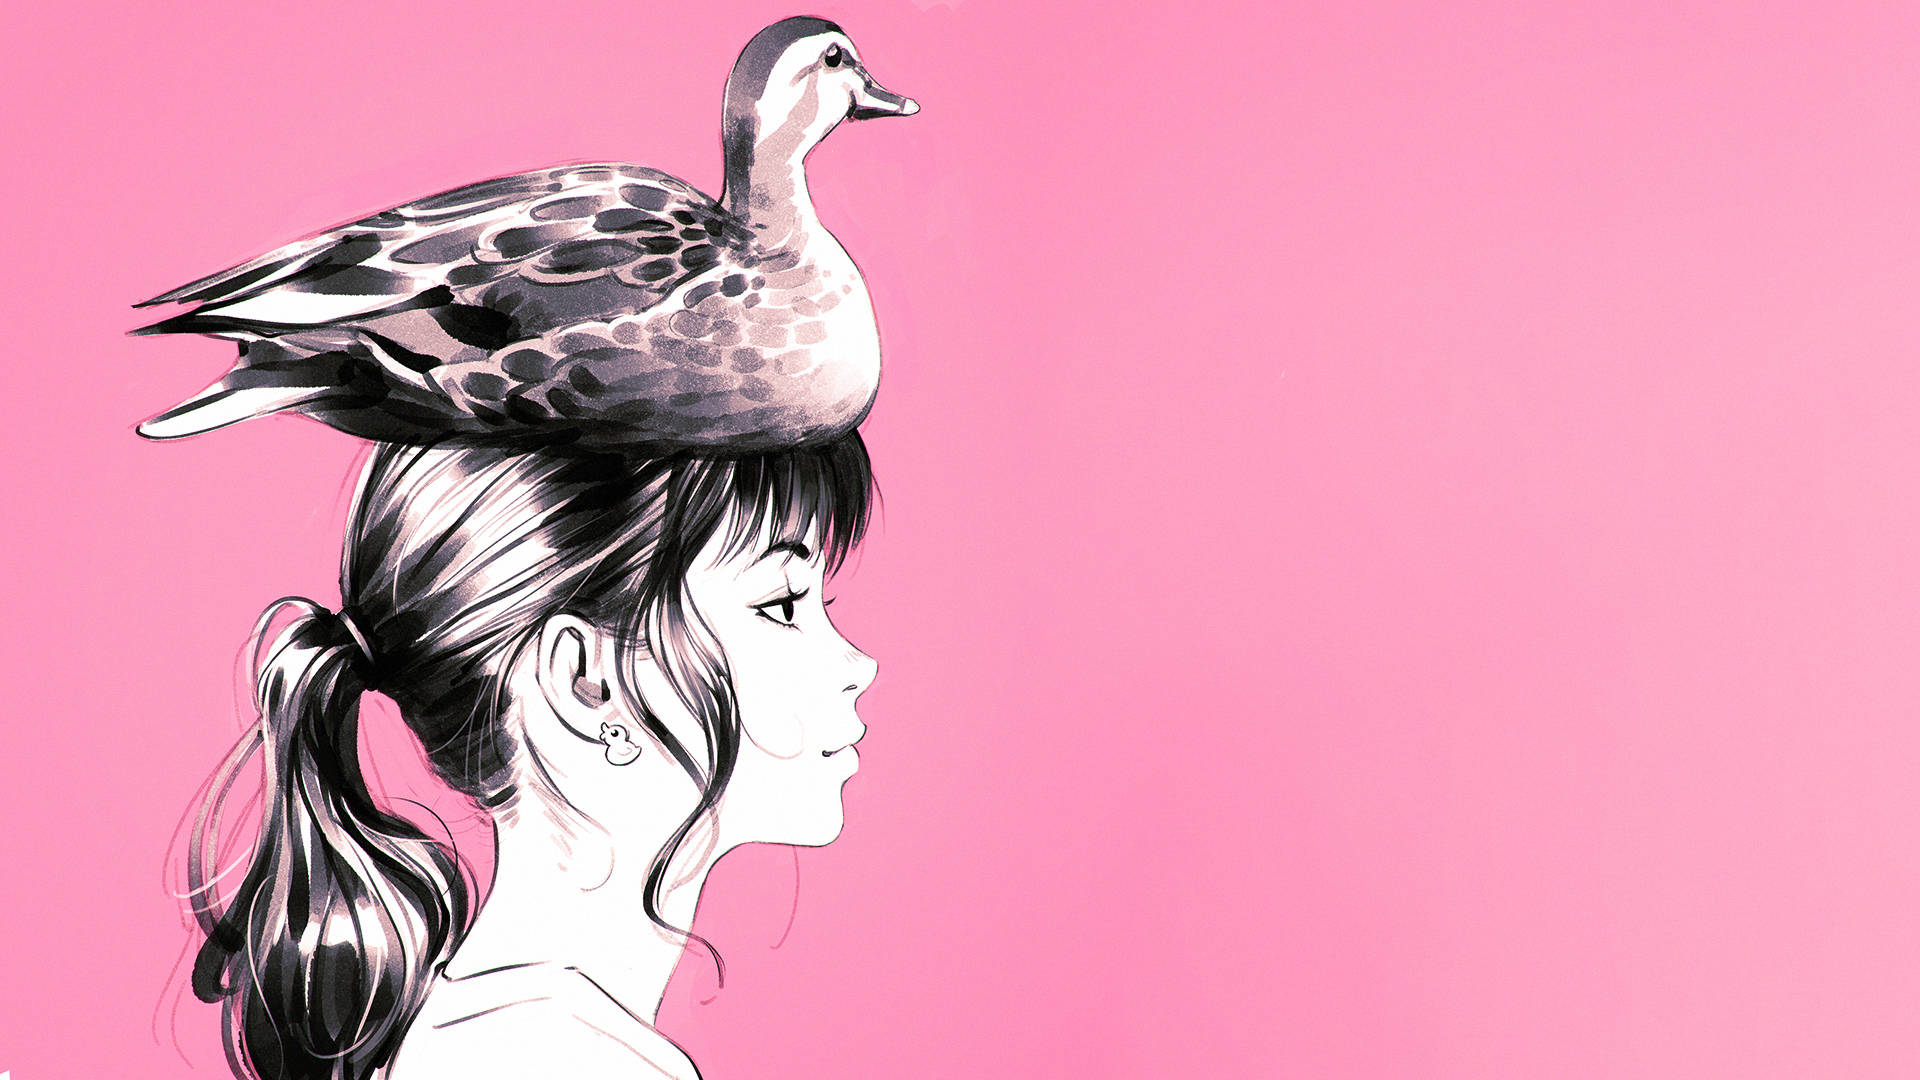 Woman With Duck Art Drawing Wallpaper